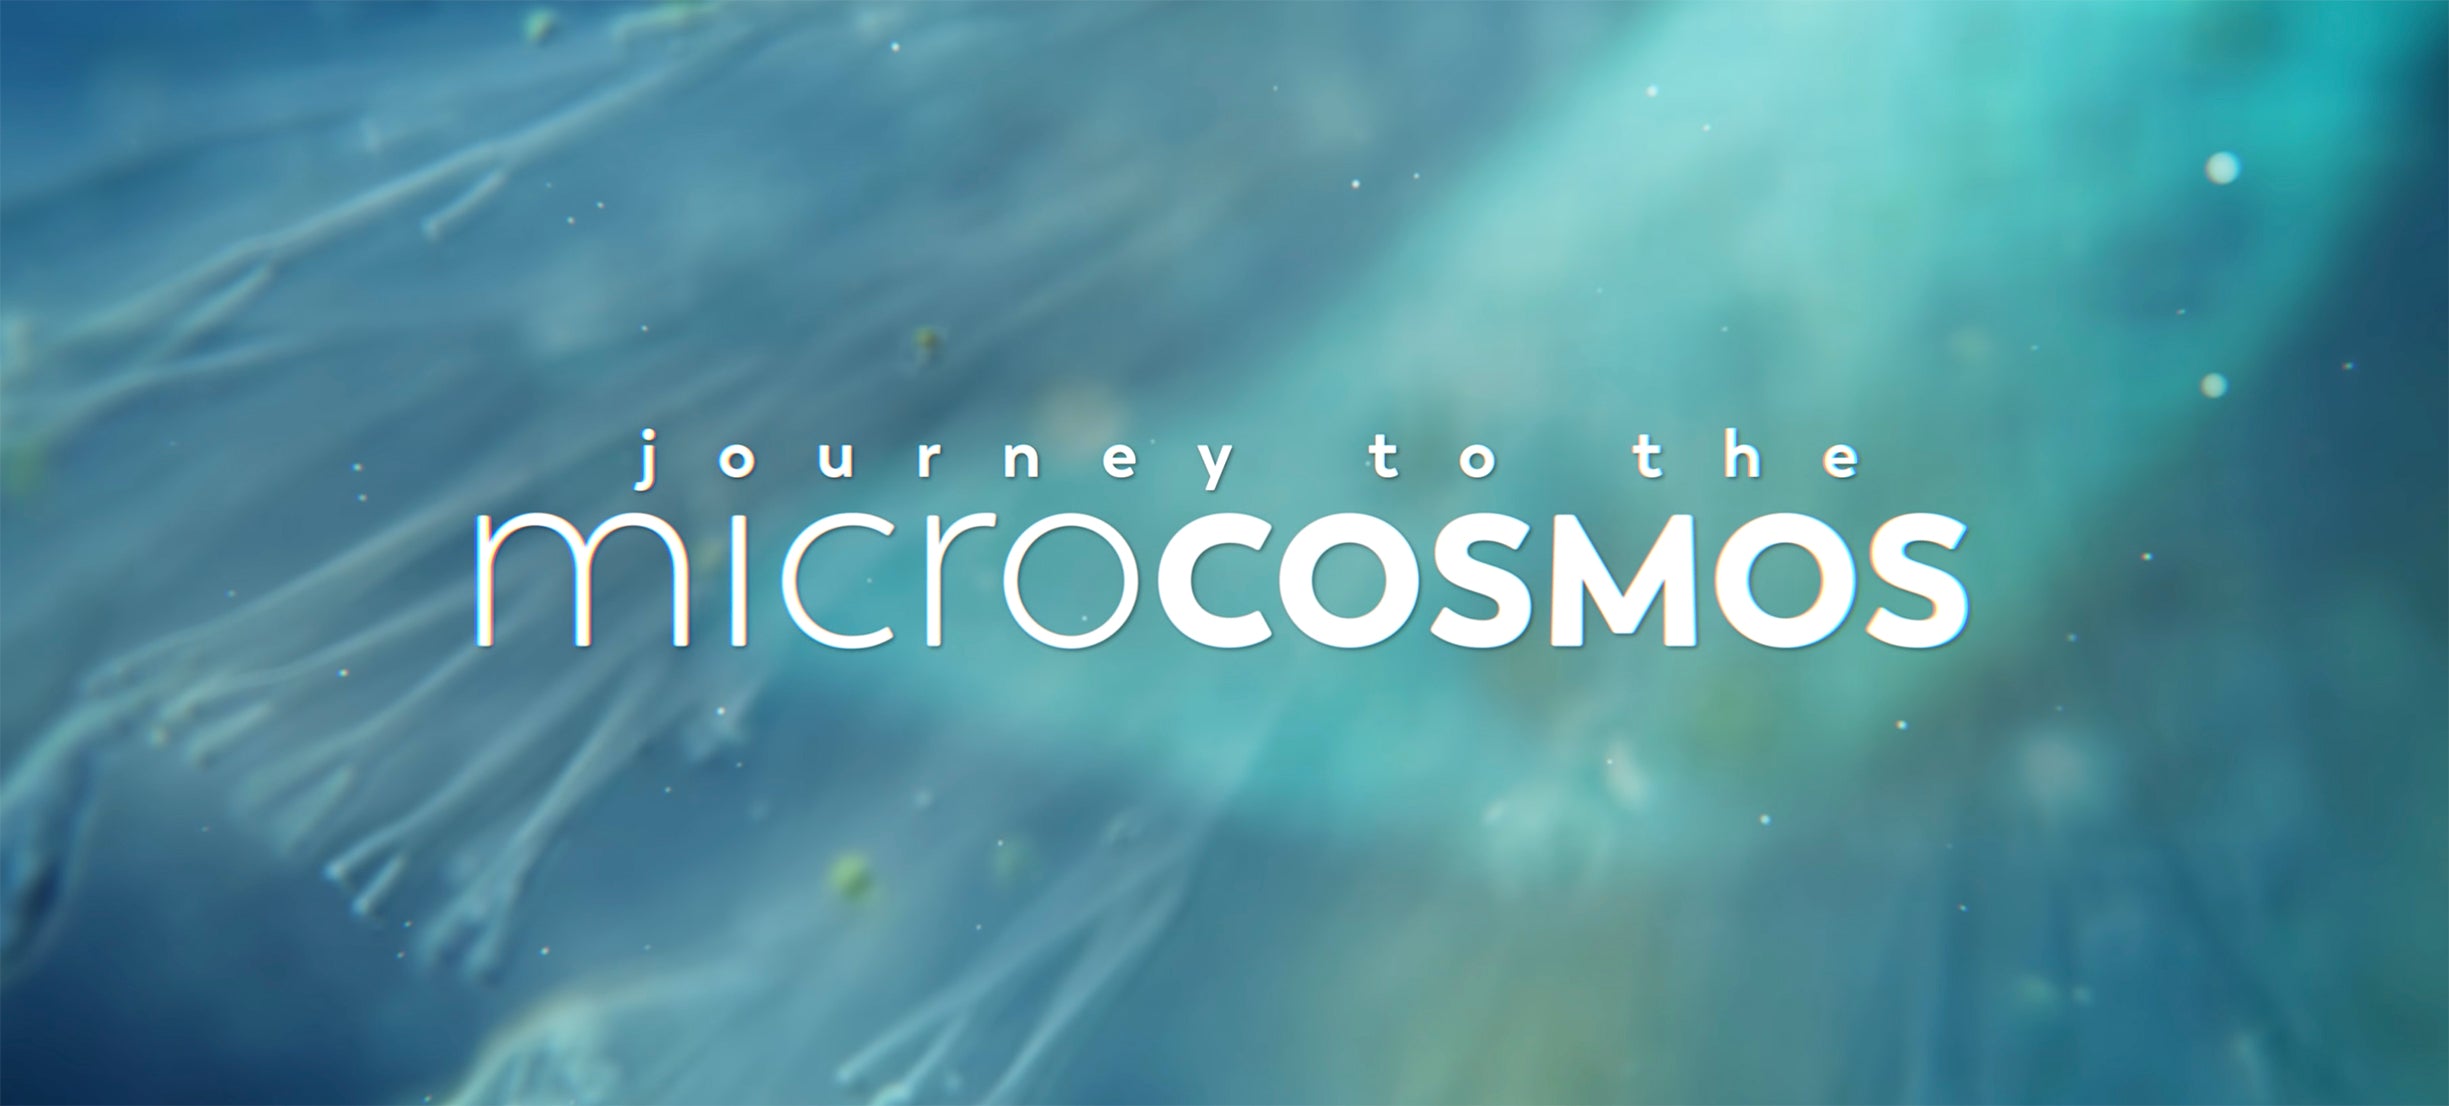 journey to the microcosmos soundtrack